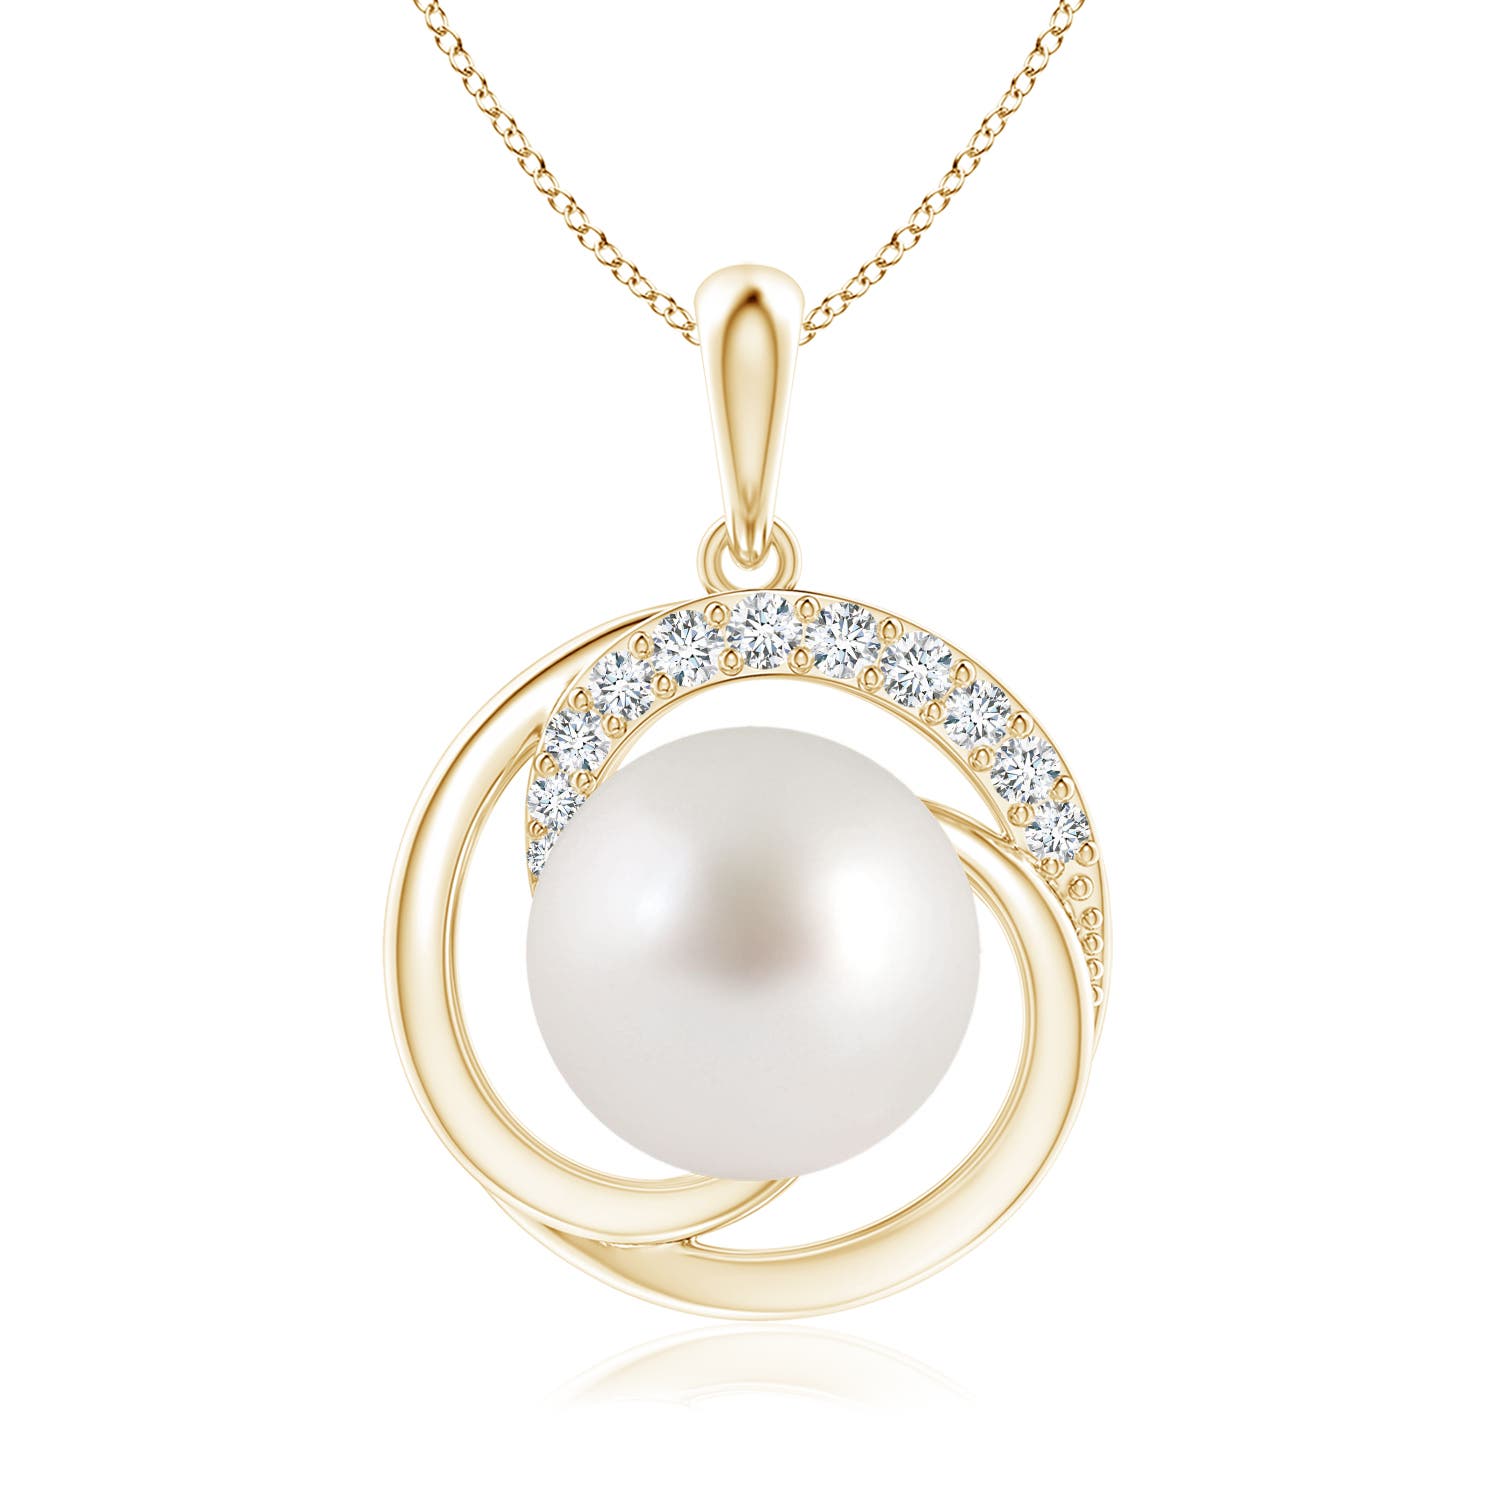 AAA - South Sea Cultured Pearl / 7.33 CT / 14 KT Yellow Gold